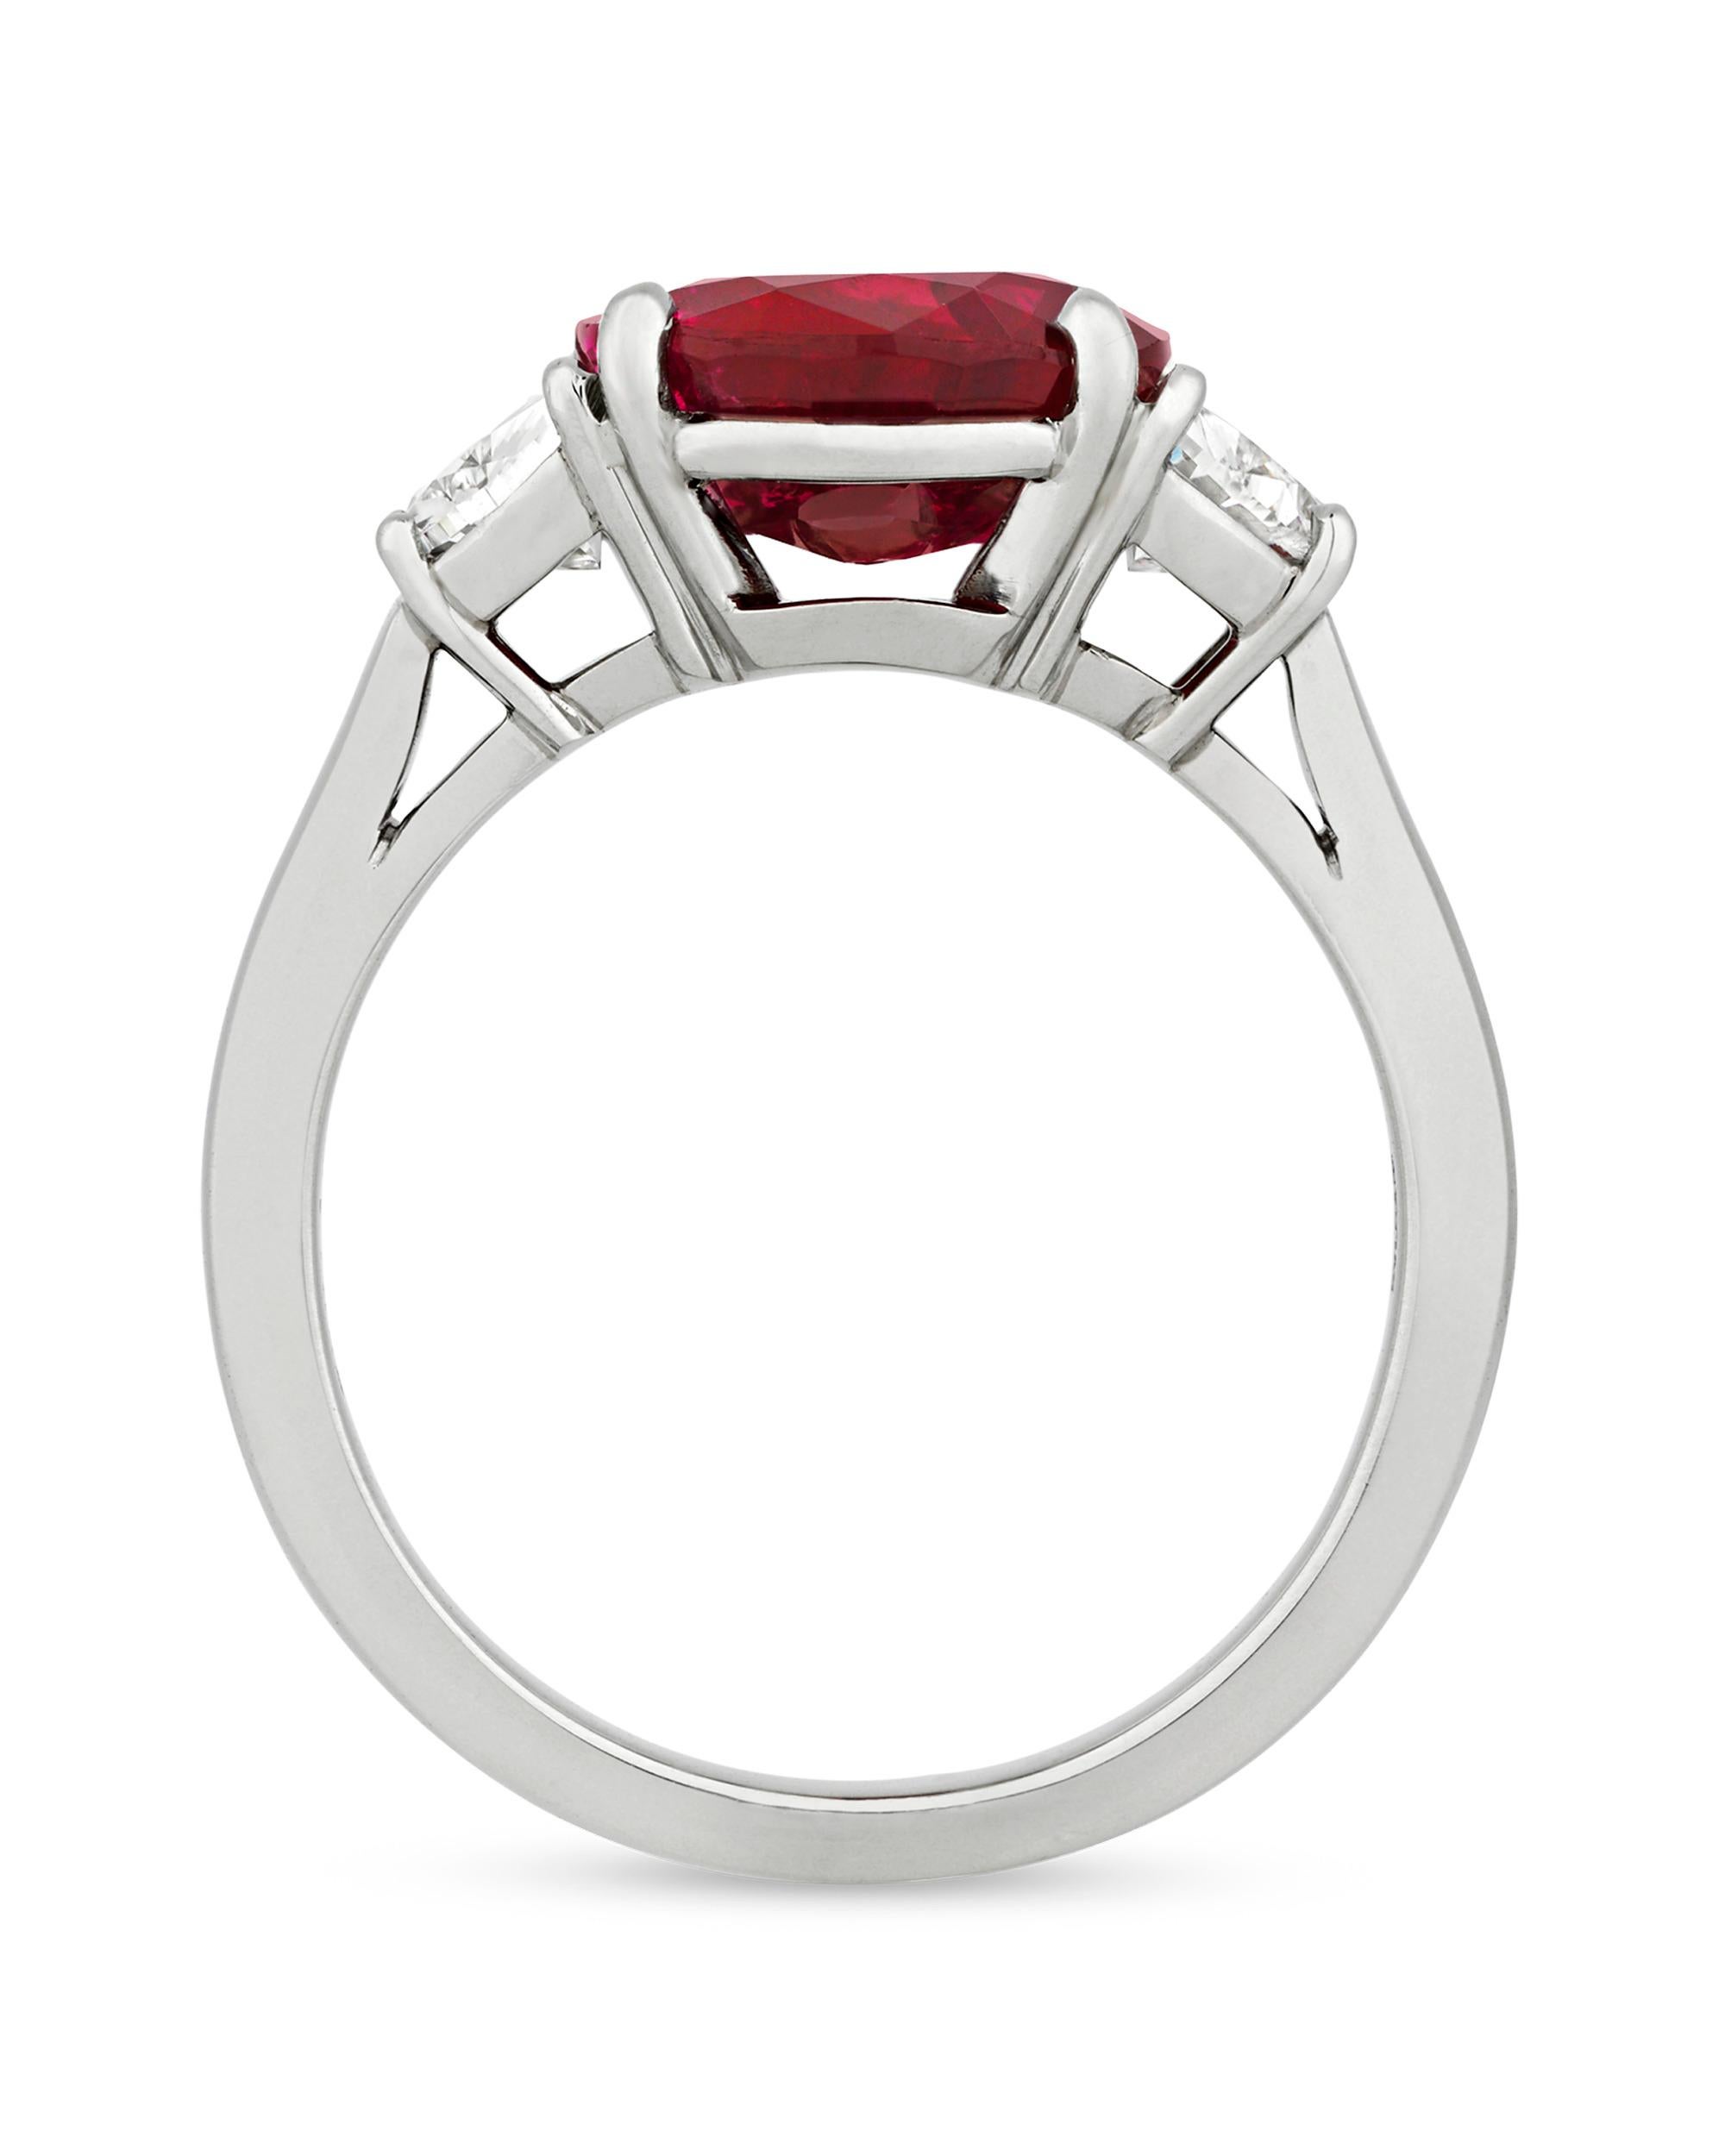 An exceptional untreated 4.06-carat Burma ruby exhibits a dramatic red hue in this ring by the famed Italian jewelry house Bulgari. For centuries, Burma has been the prime location for the mining of the finest quality rubies in the world. Burmese